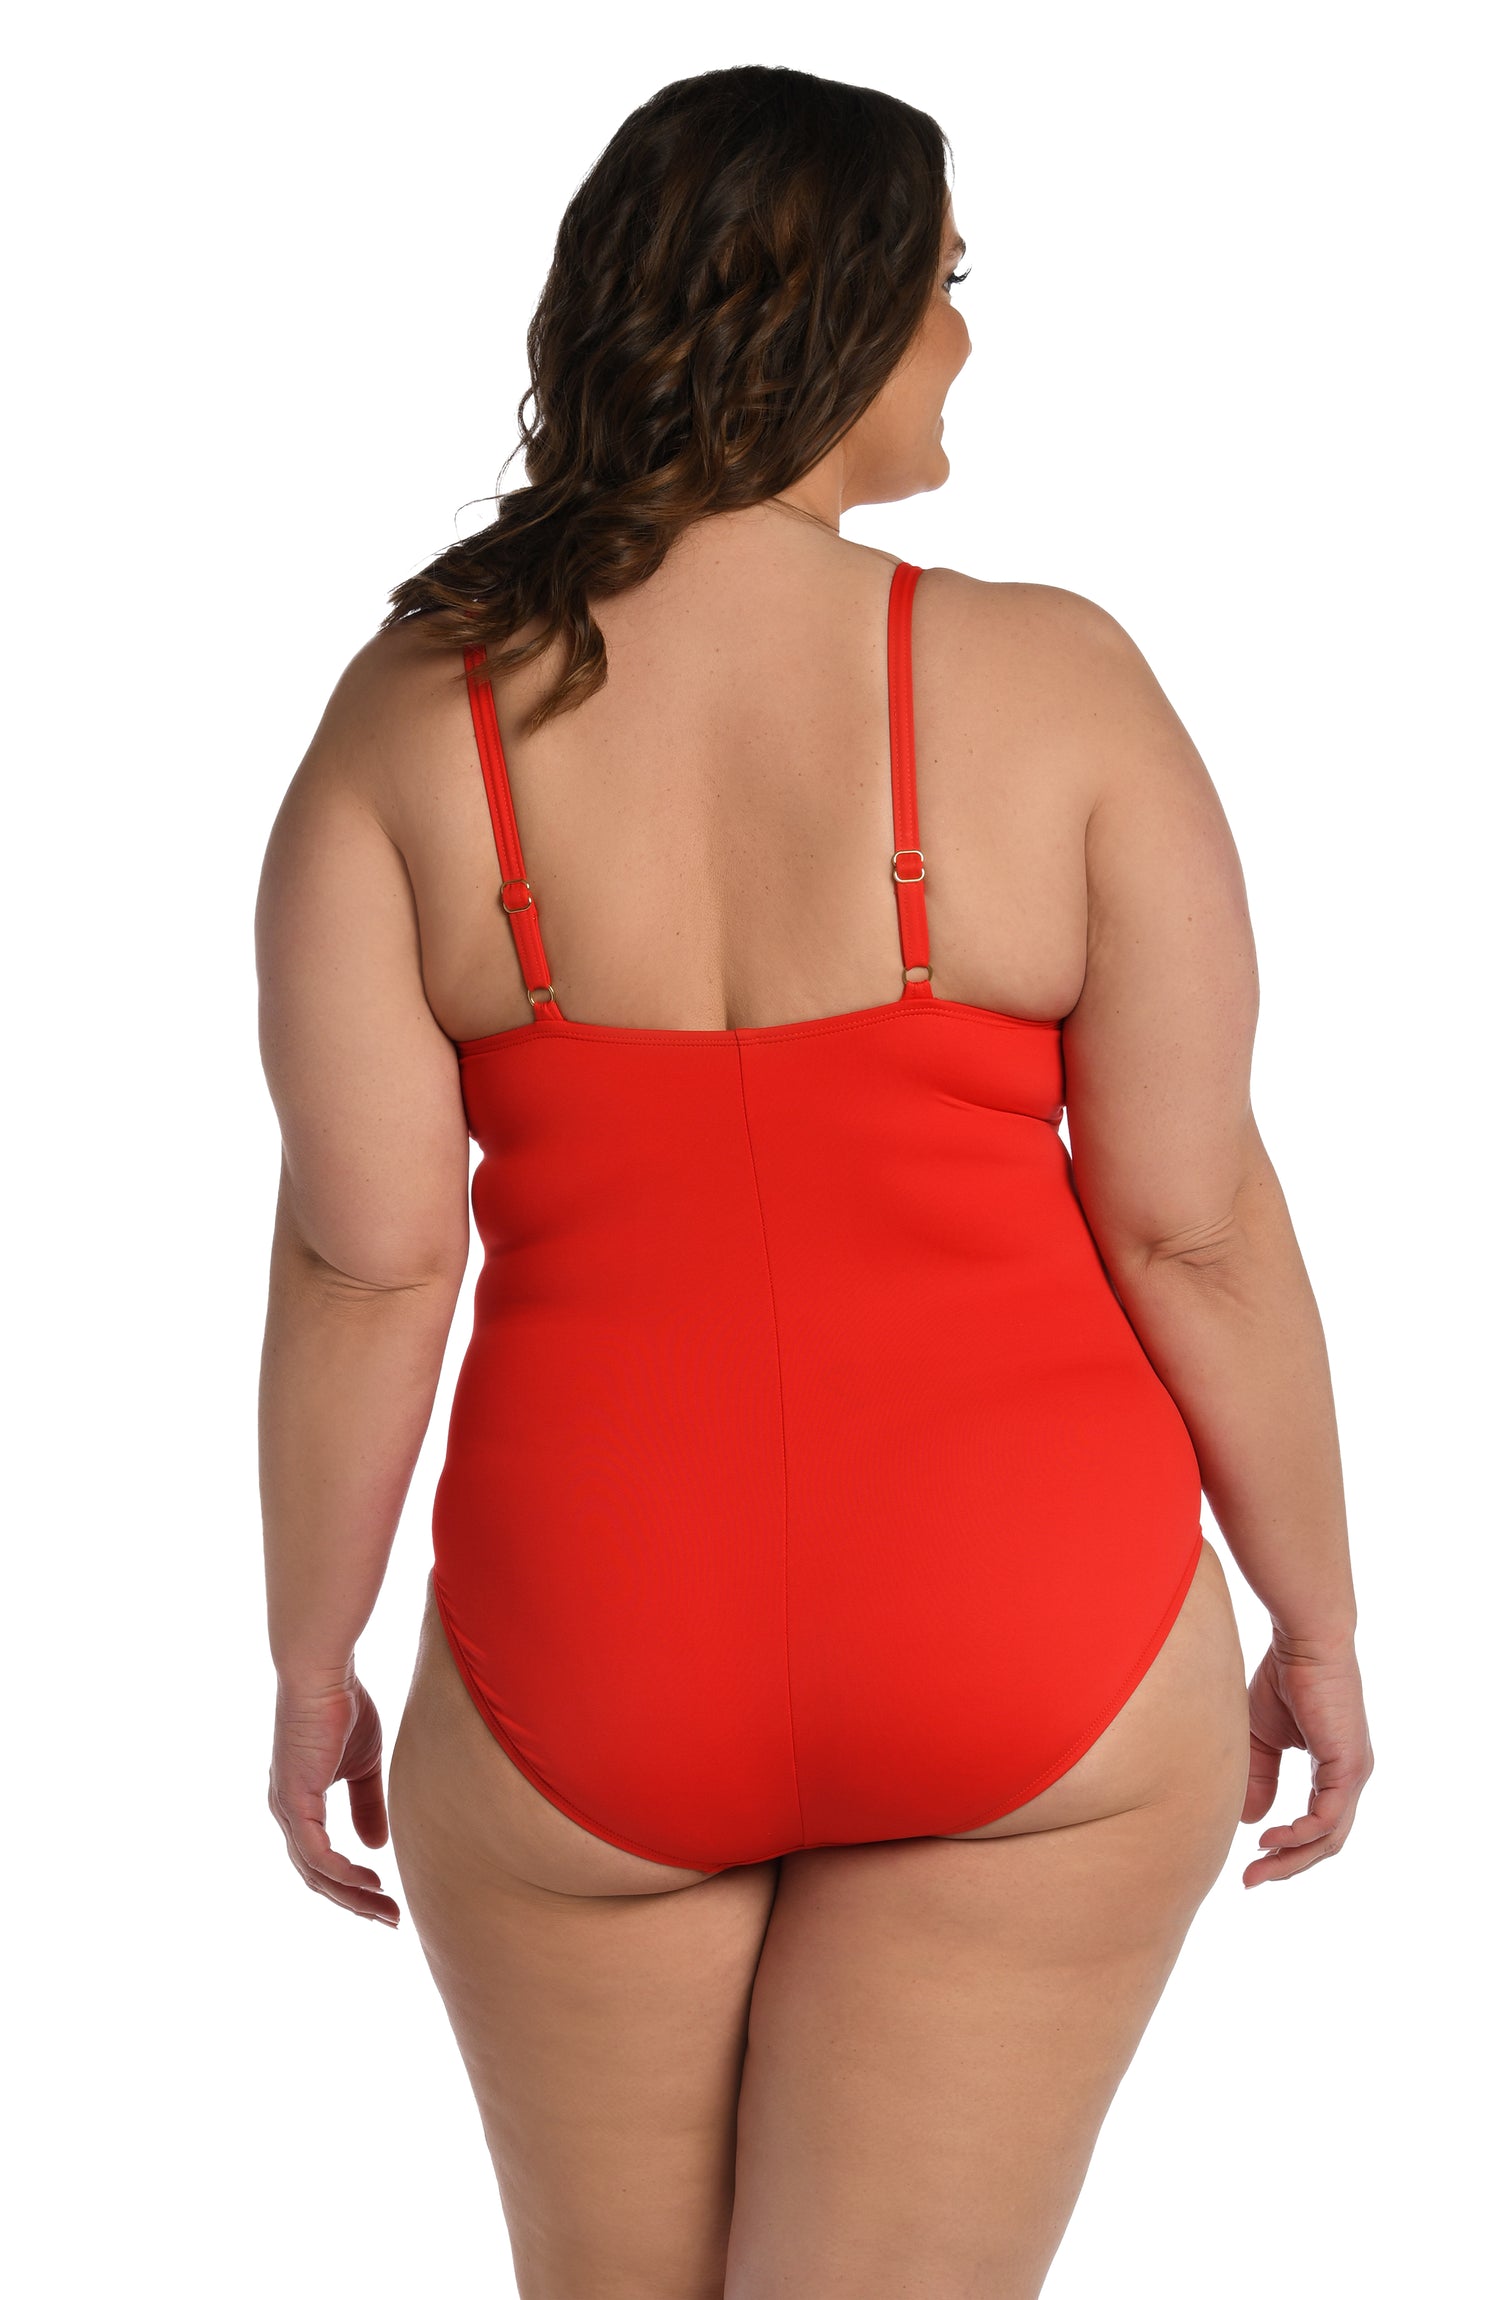 Model is wearing a cherry colored one piece swimsuit from our Best-Selling Island Goddess collection.